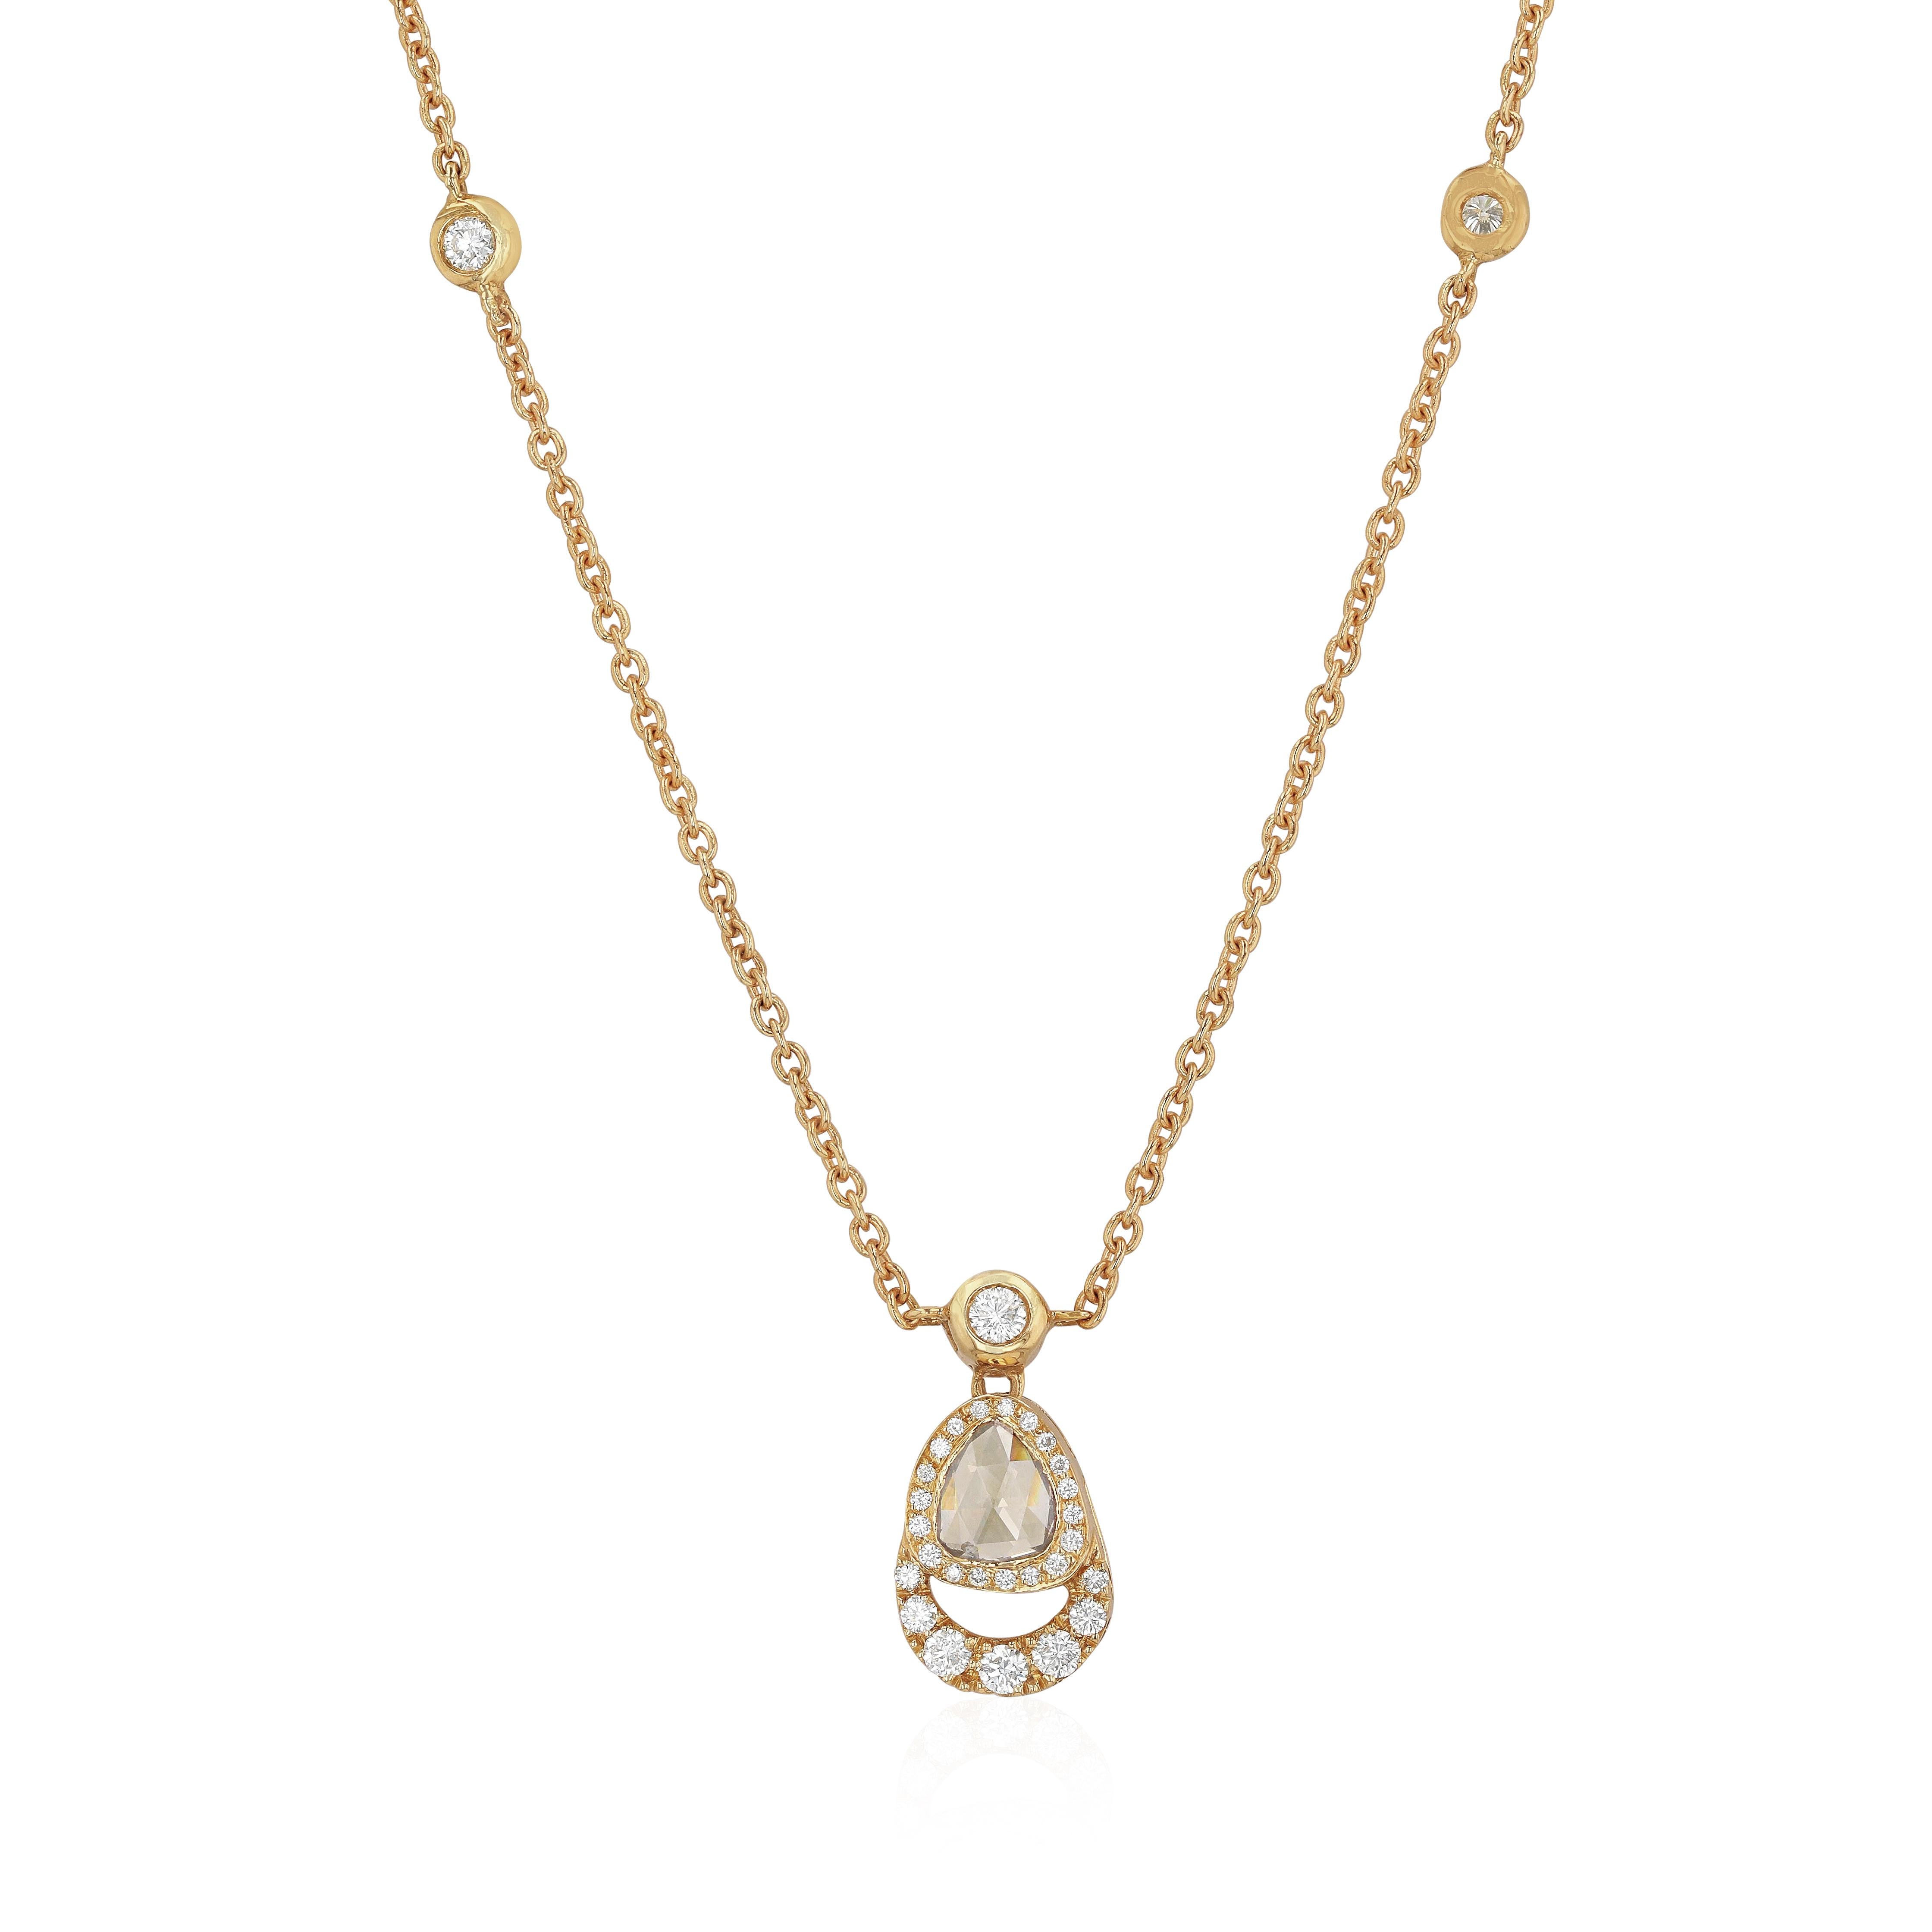 Designed with a charm, the Palm Tree pendant is rendered in yellow gold and set with faceted white diamonds. It features a polished tear-shaped pendant that is adorned with rose cut brown diamond.
- Diamonds (Total Carat Weight:0.77ct) 